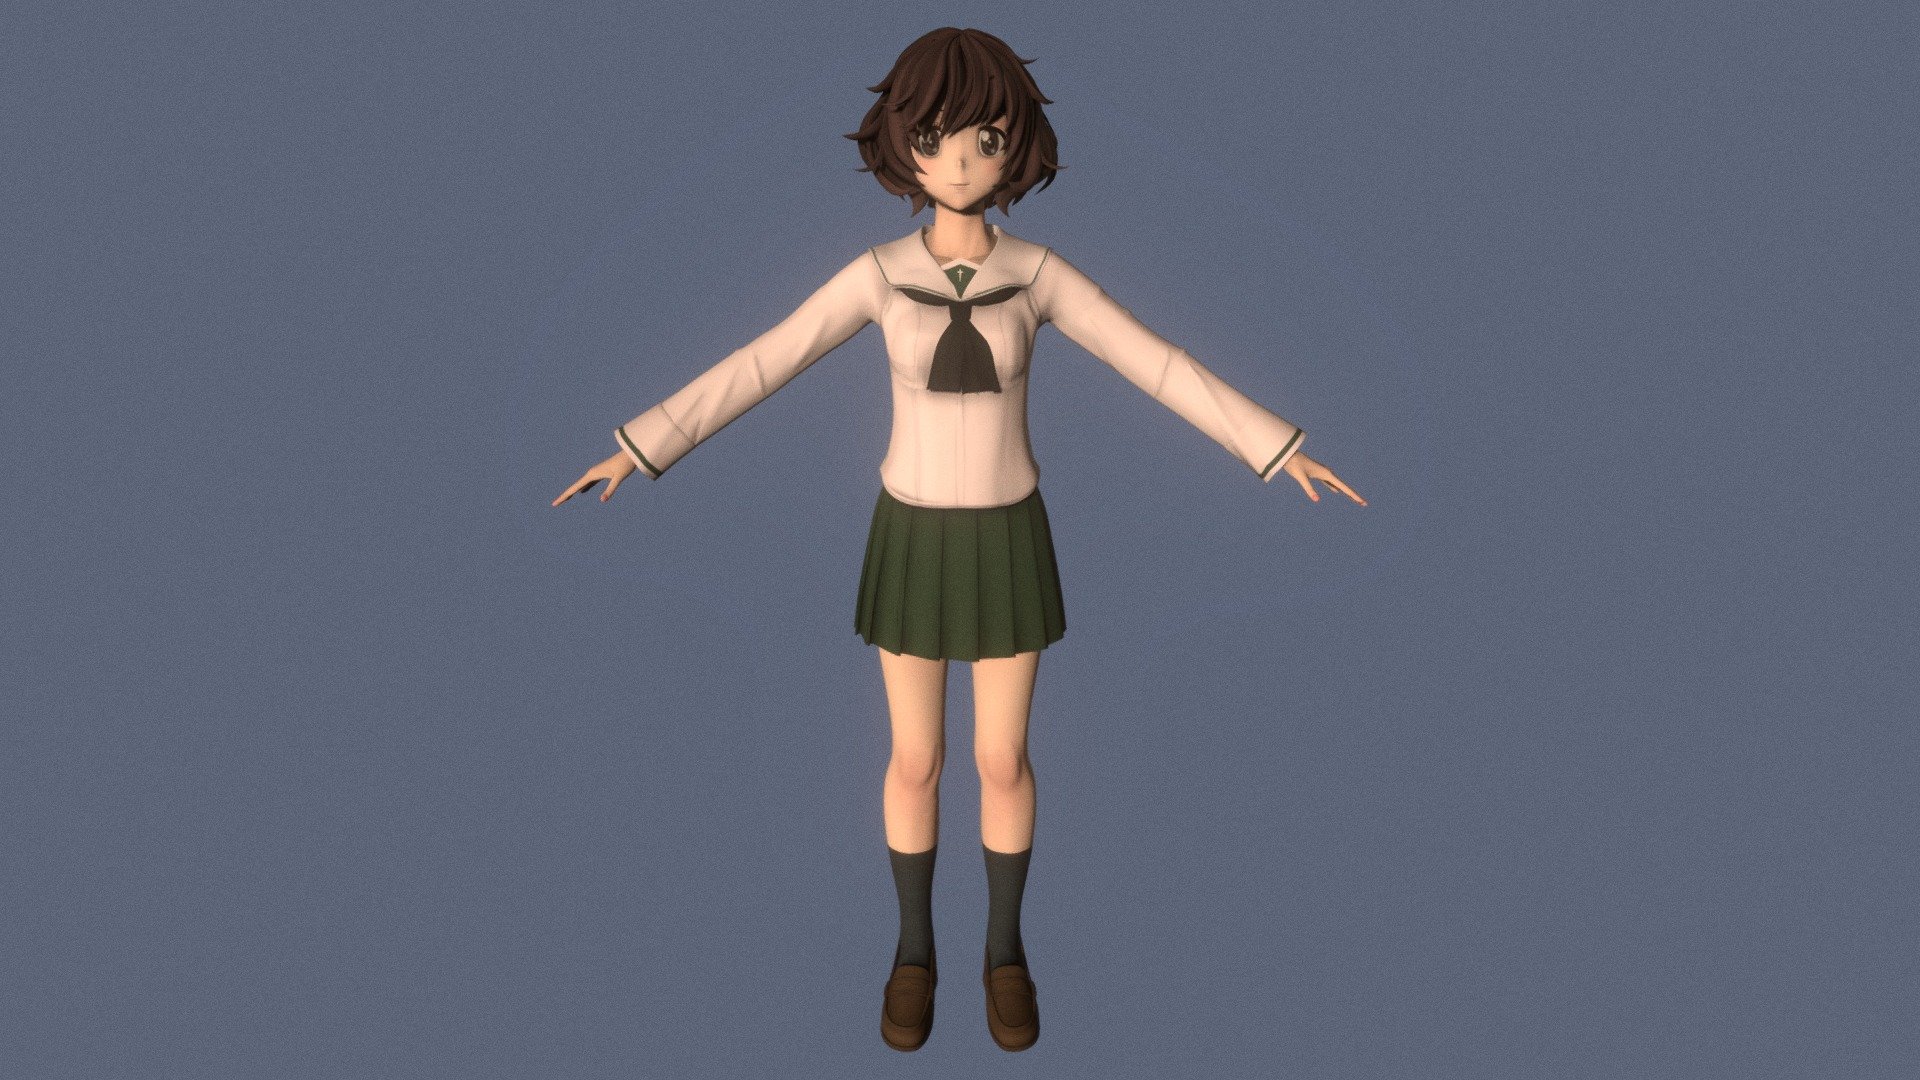 T-pose rigged model of anime girl Yukari Akiyama (Girls und Panzer).

Body and clothings are rigged and skinned by 3ds Max CAT system.

Eye direction and facial animation controlled by Morpher modifier / Shape Keys / Blendshape.

This product include .FBX (ver. 7200) and .MAX (ver. 2010) files.

3ds Max version is turbosmoothed to give a high quality render (as you can see here).

Original main body mesh have ~7.000 polys.

This 3D model may need some tweaking to adapt the rig system to games engine and other platforms.

I support convert model to various file formats (the rig data will be lost in this process): 3DS; AI; ASE; DAE; DWF; DWG; DXF; FLT; HTR; IGS; M3G; MQO; OBJ; SAT; STL; W3D; WRL; X.

You can buy all of my models in one pack to save cost: https://sketchfab.com/3d-models/all-of-my-anime-girls-c5a56156994e4193b9e8fa21a3b8360b

And I can make commission models.

If you have any questions, please leave a comment or contact me via my email 3d.eden.project@gmail.com 3d model